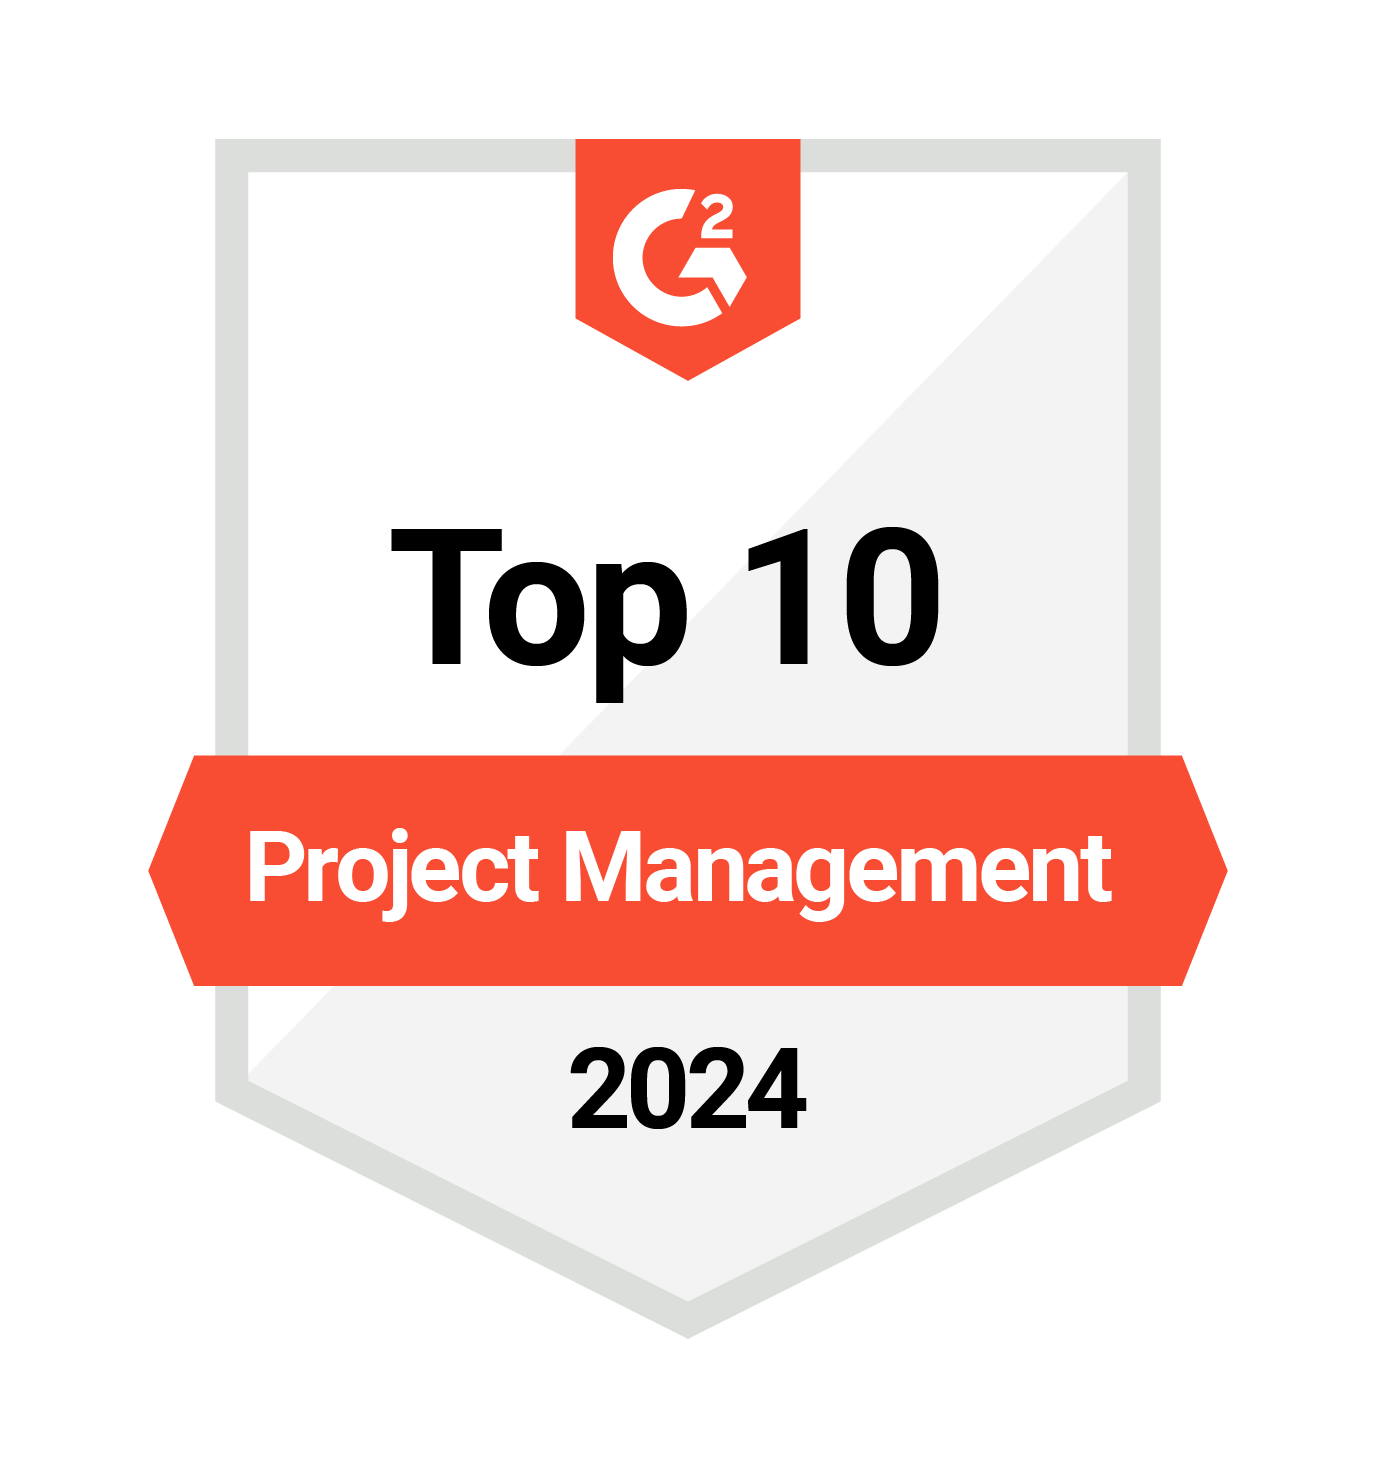 G2 Leader in Project Management